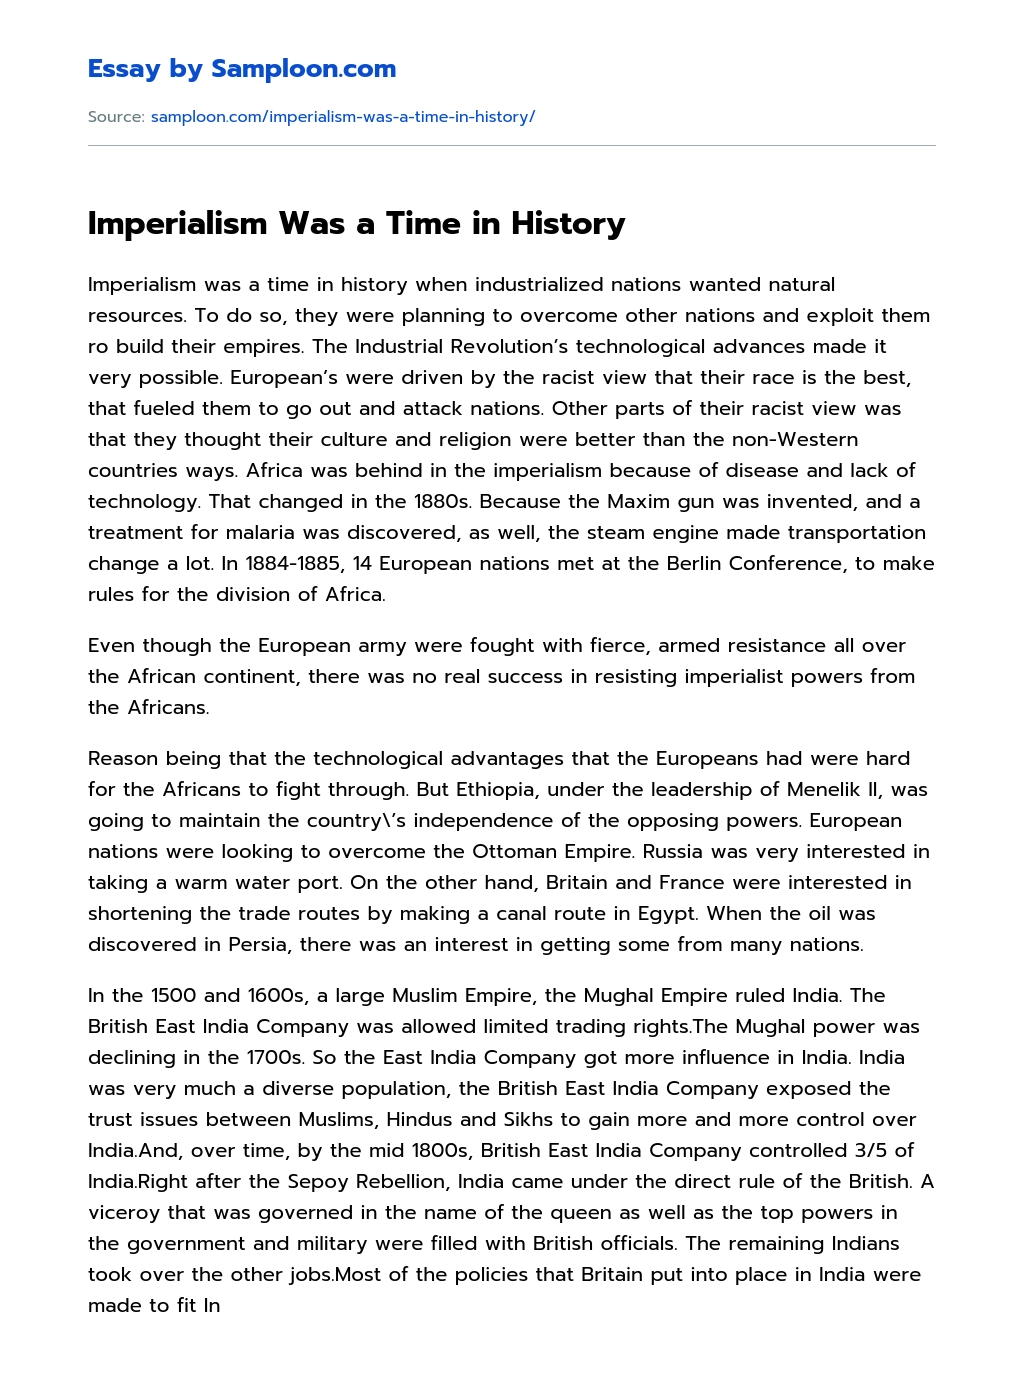 Imperialism Was a Time in History essay